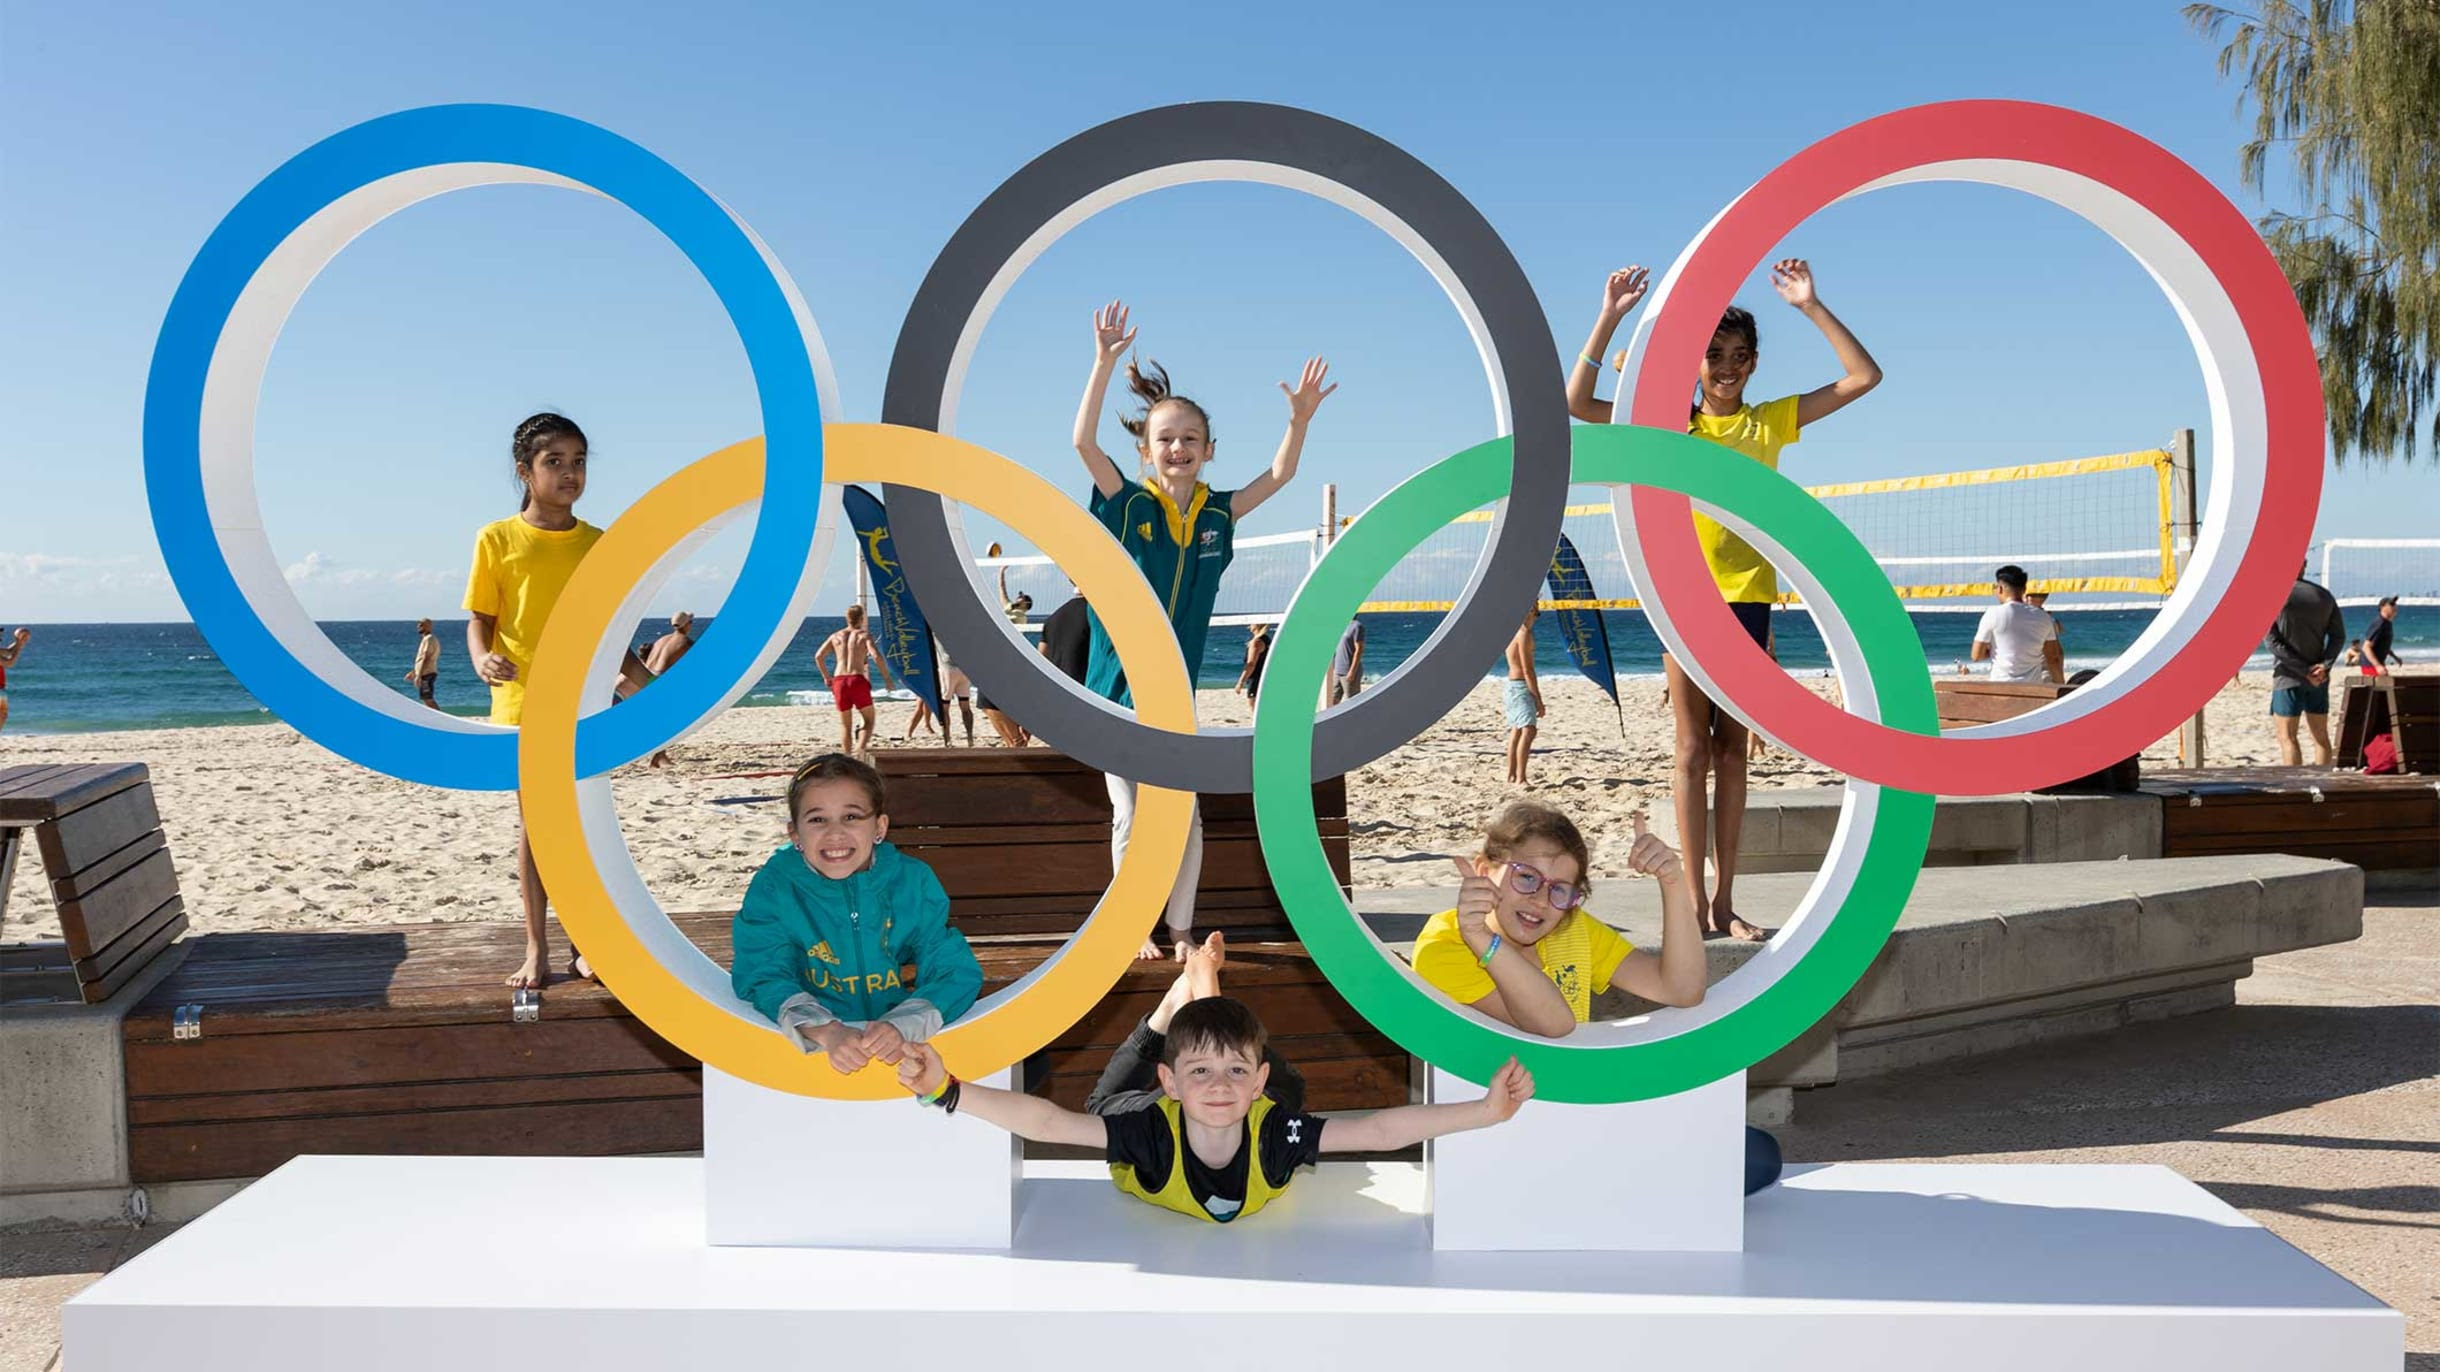 IOC Coordination Commission praises strong foundations laid for impactful Olympic and Paralympic Games Brisbane 2032